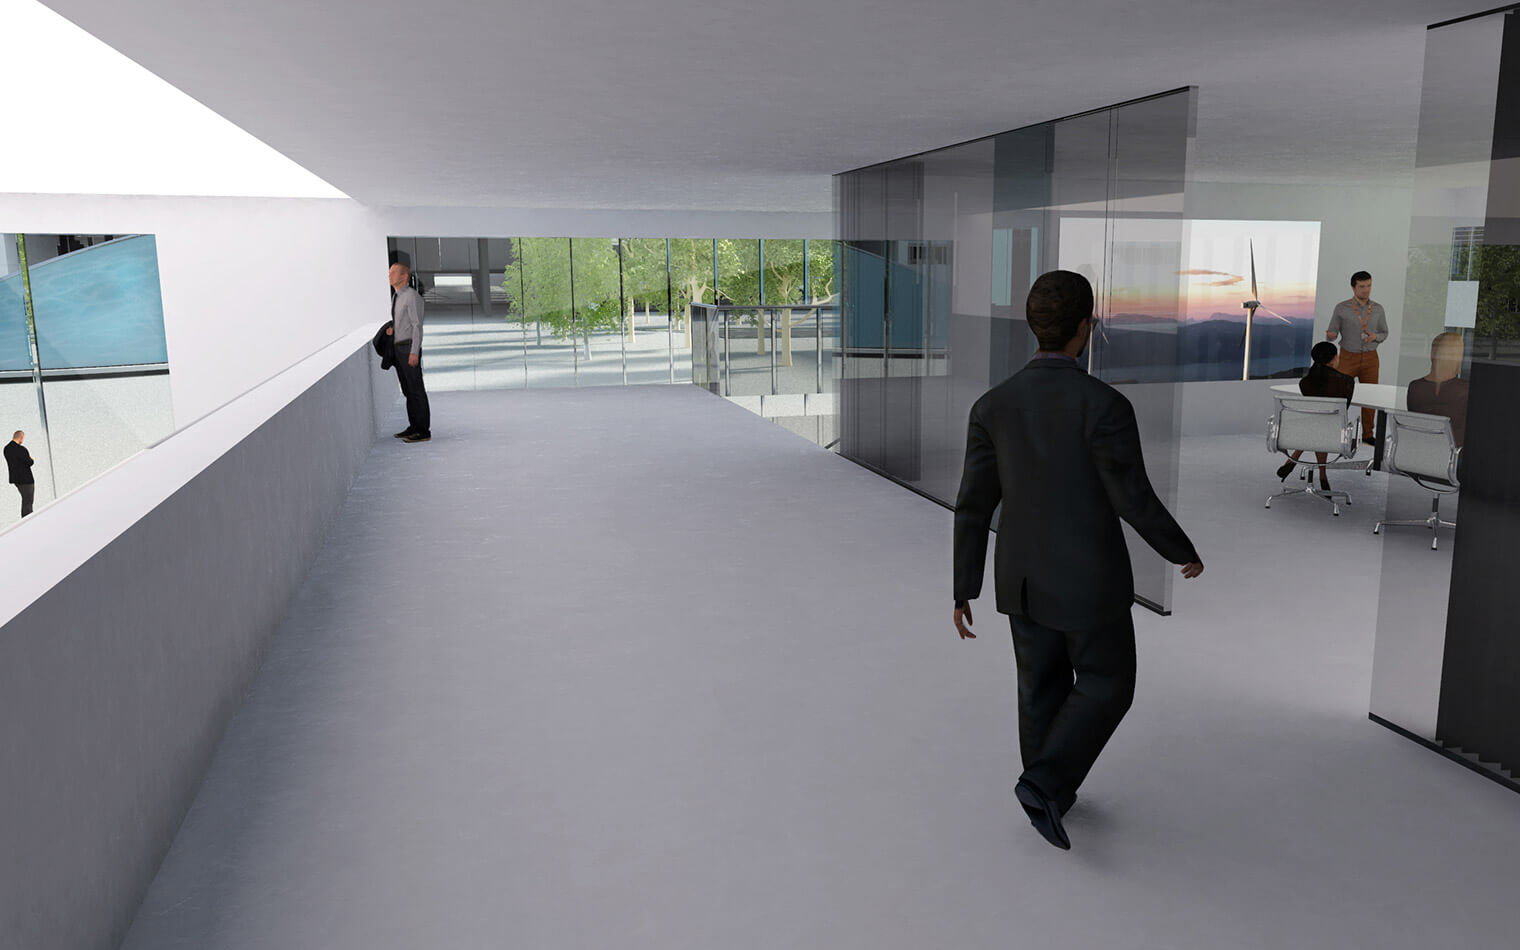 This picture shows the entrance to a meeting room on the first floor of the Wilo Networking Cube building.